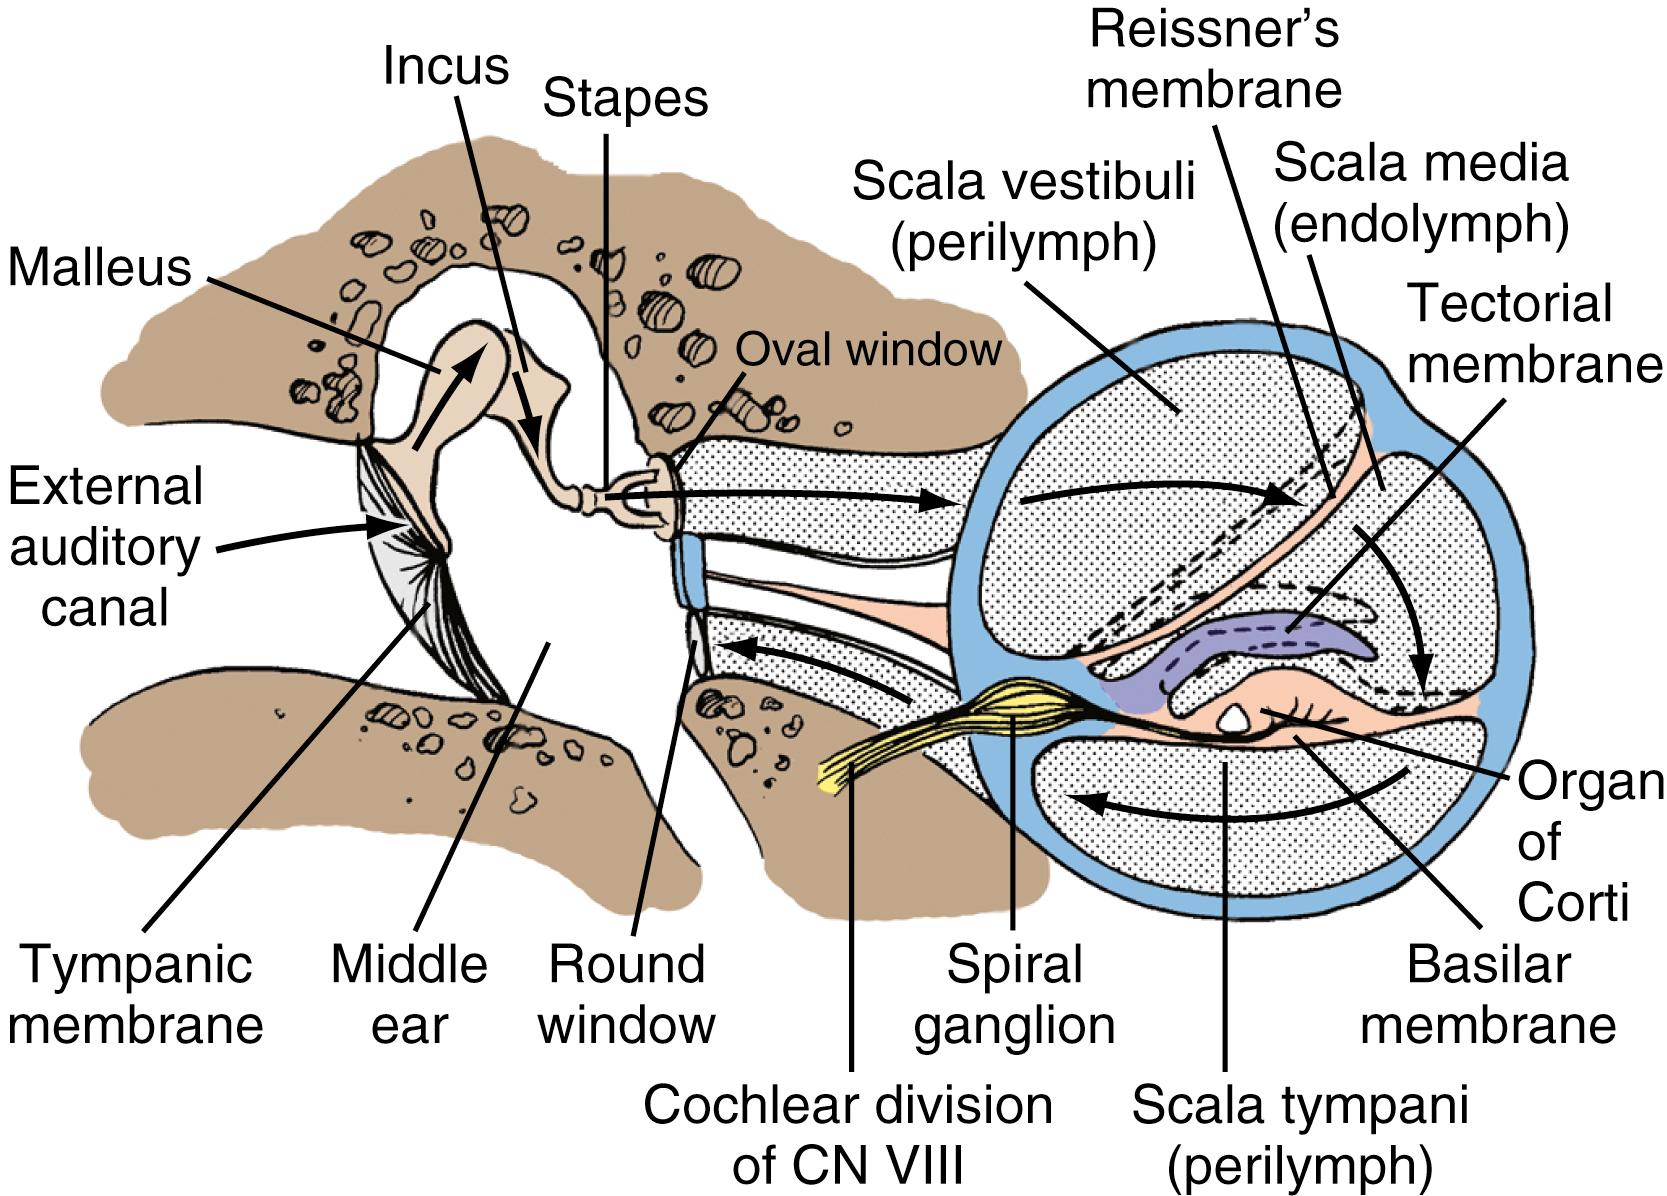 Figure 16.2, Sound waves contact the tympanic membrane, and the acoustic energy is transformed and transmitted to the inner ear through the ossicular chain in the middle ear. Displacement of the oval window by the stapes footplate results in instantaneous transmission of the pressure through perilymph in the scala vestibuli, Reissner membrane, endolymph, basilar membrane, and perilymph in the scala tympani and in outward displacement of the round window membrane. Hair cell transduction occurs as the basilar membrane containing the organ of Corti moves relative to the tectorial membrane. CN, Cranial nerve.